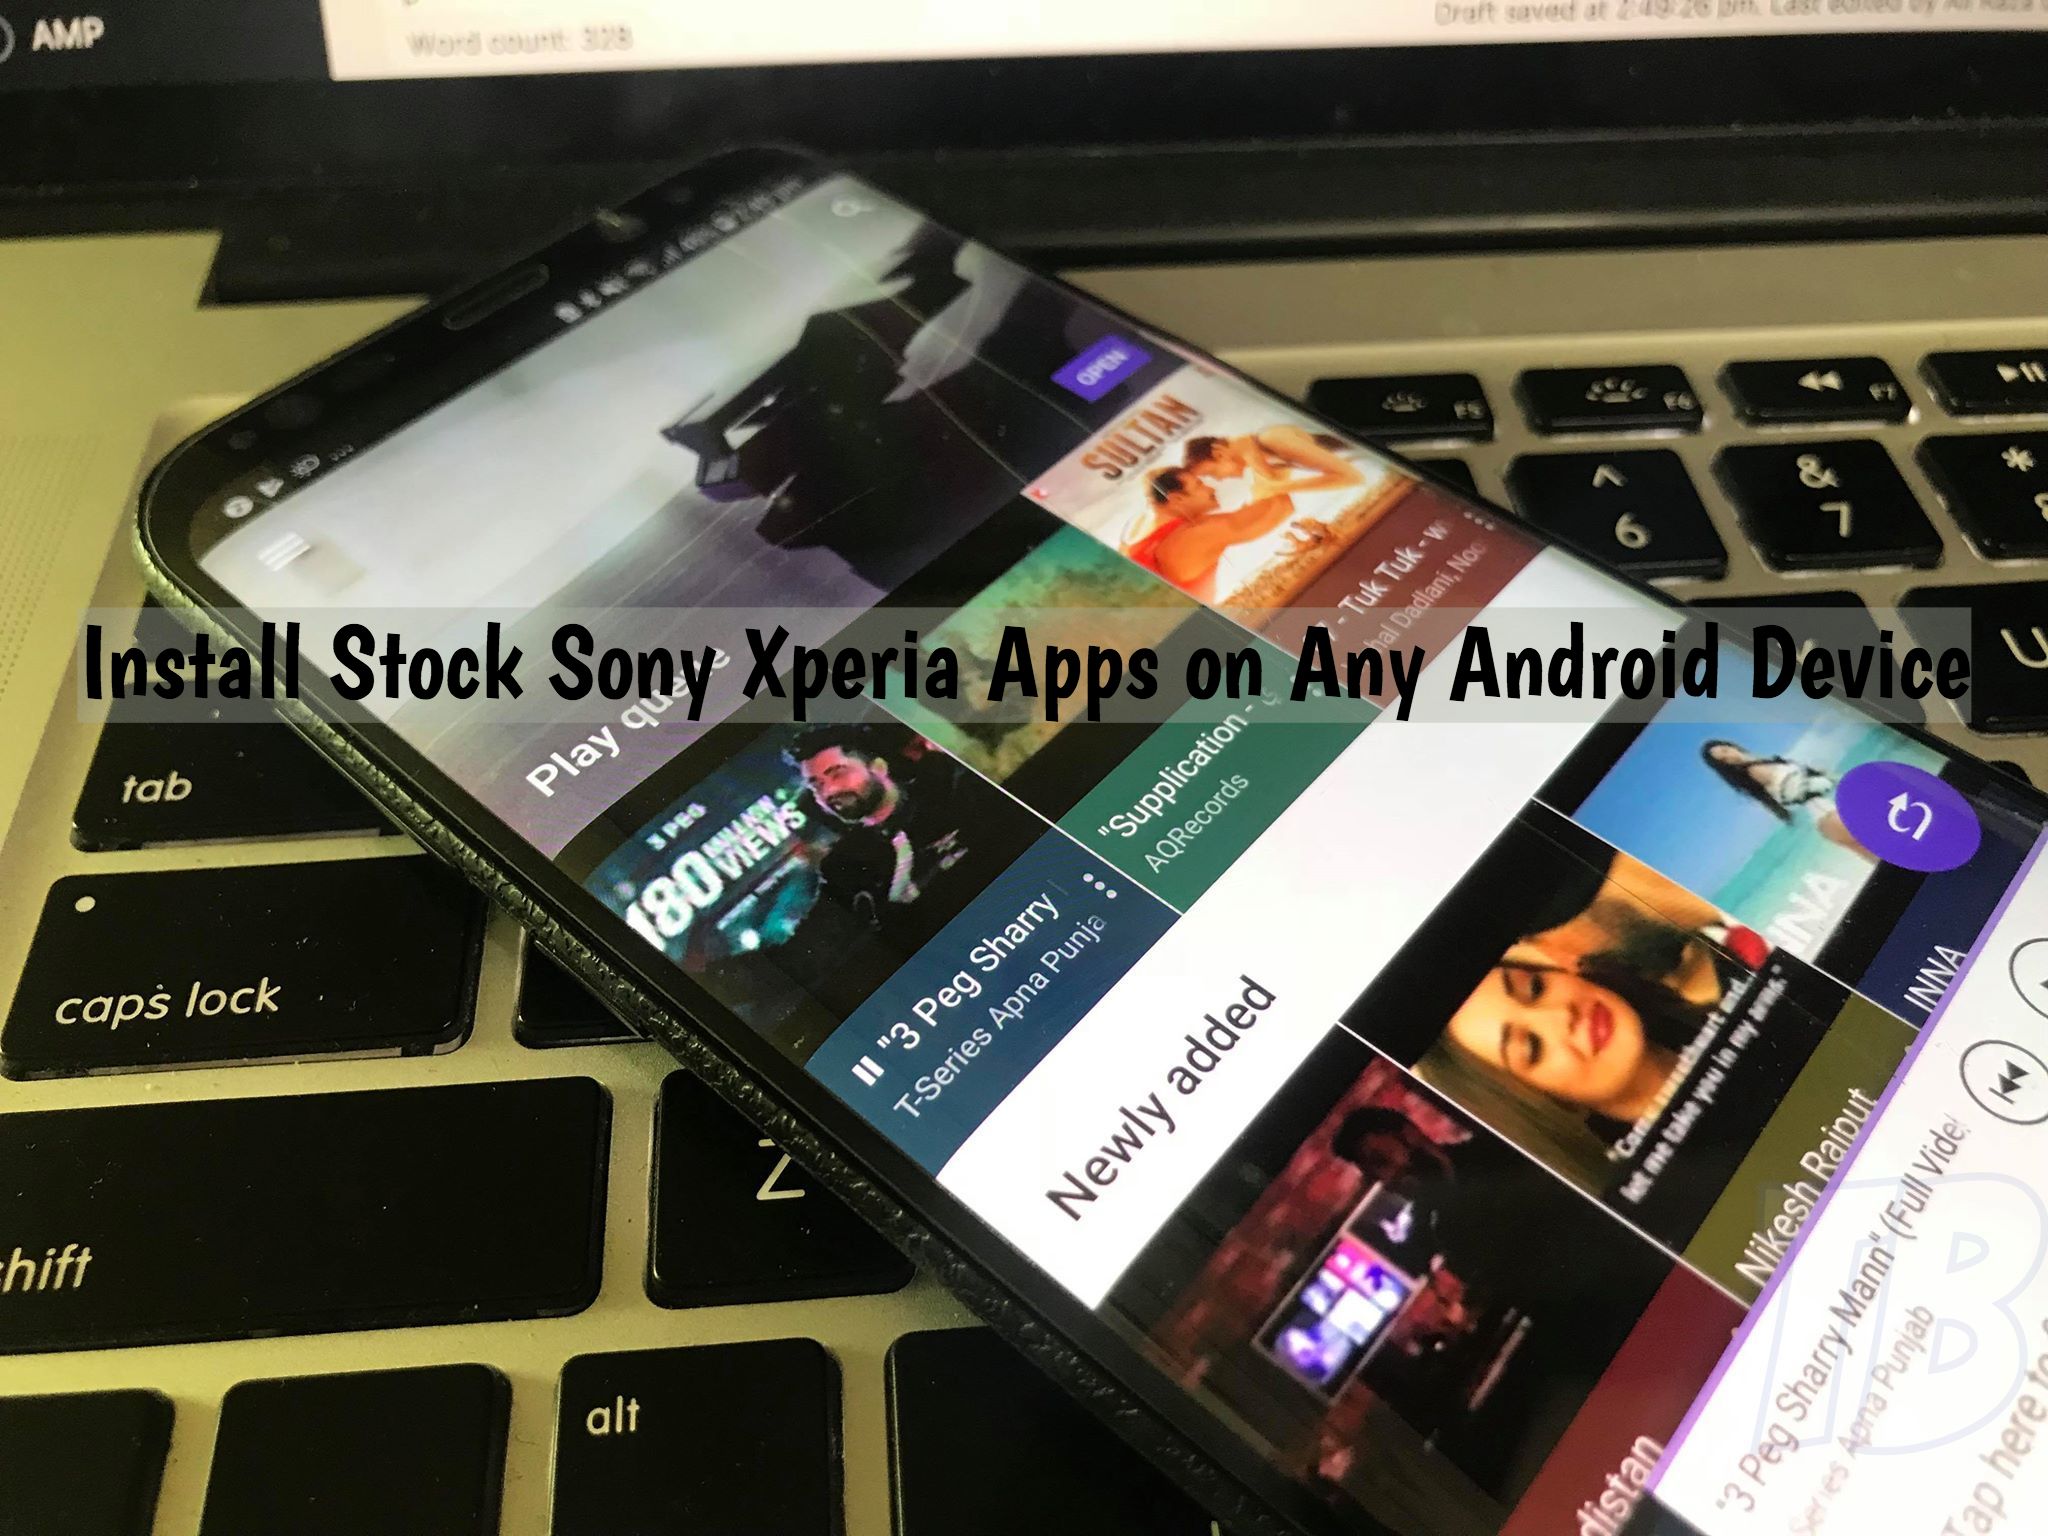 Install Stock Sony Xperia Apps on Any Android Device